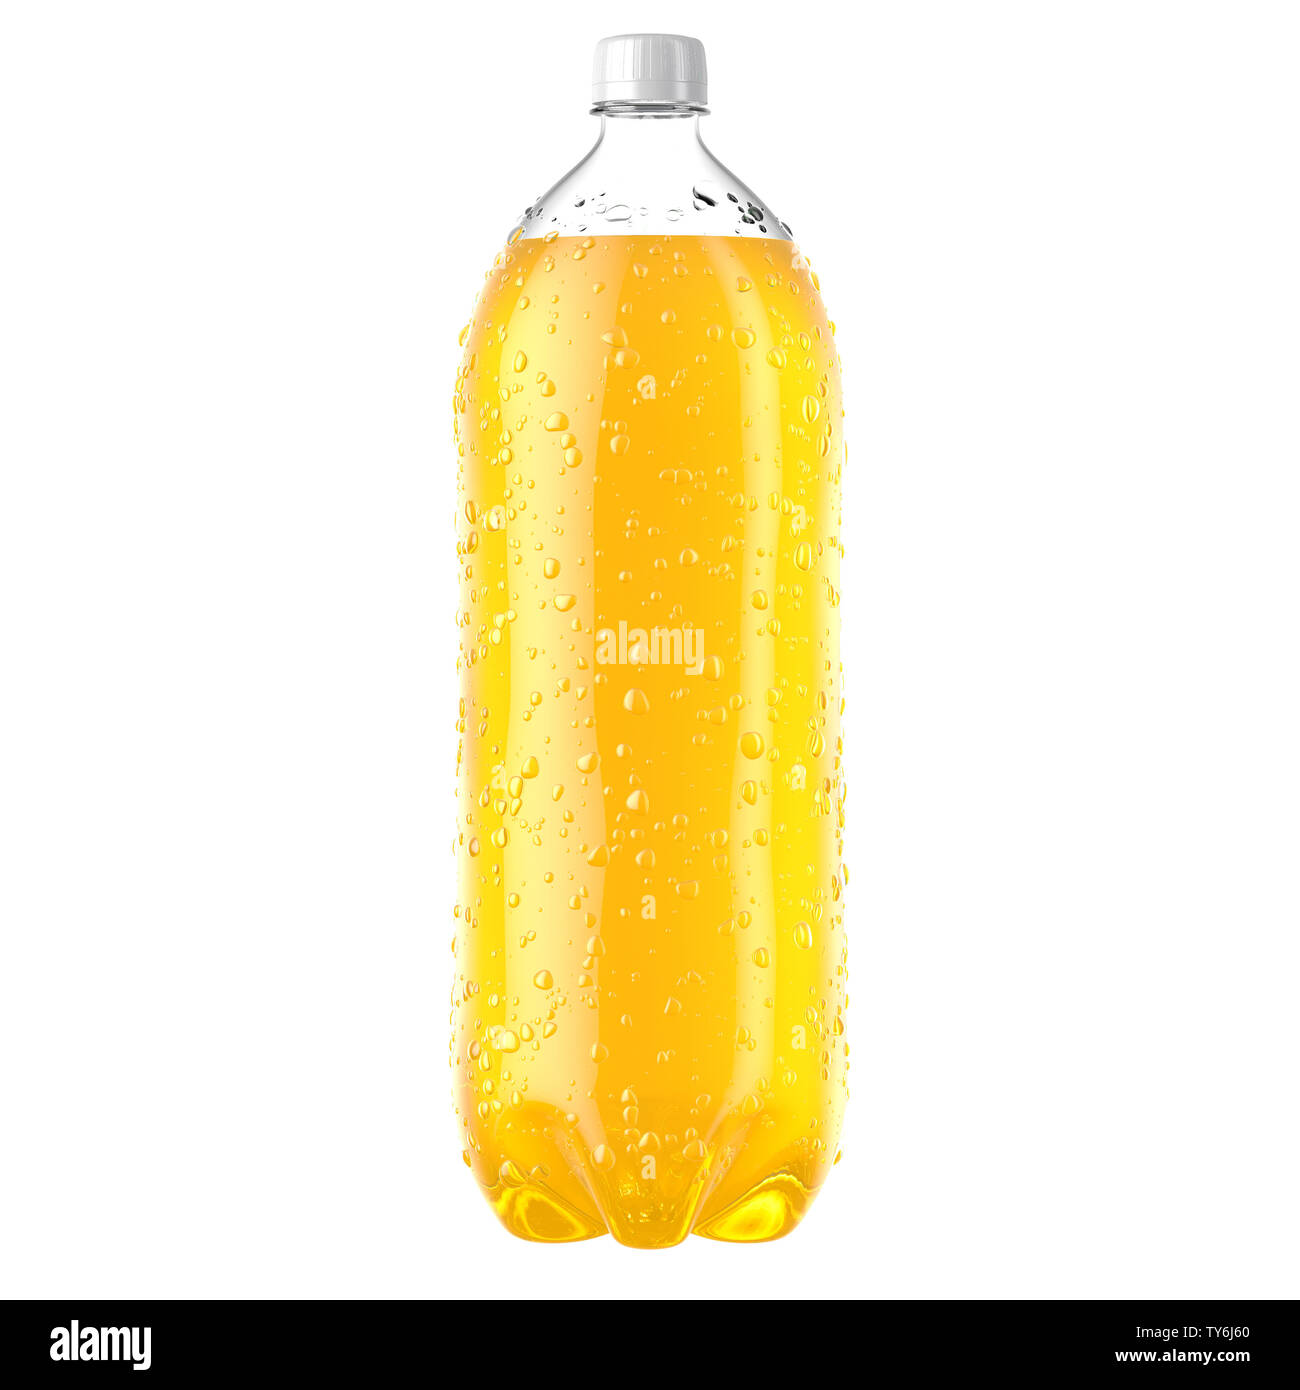 Download A Plastic Two Liter Yellow Soda Bottle With Condensation Droplets On An Isolated White Studio Background 3d Render Stock Photo Alamy Yellowimages Mockups